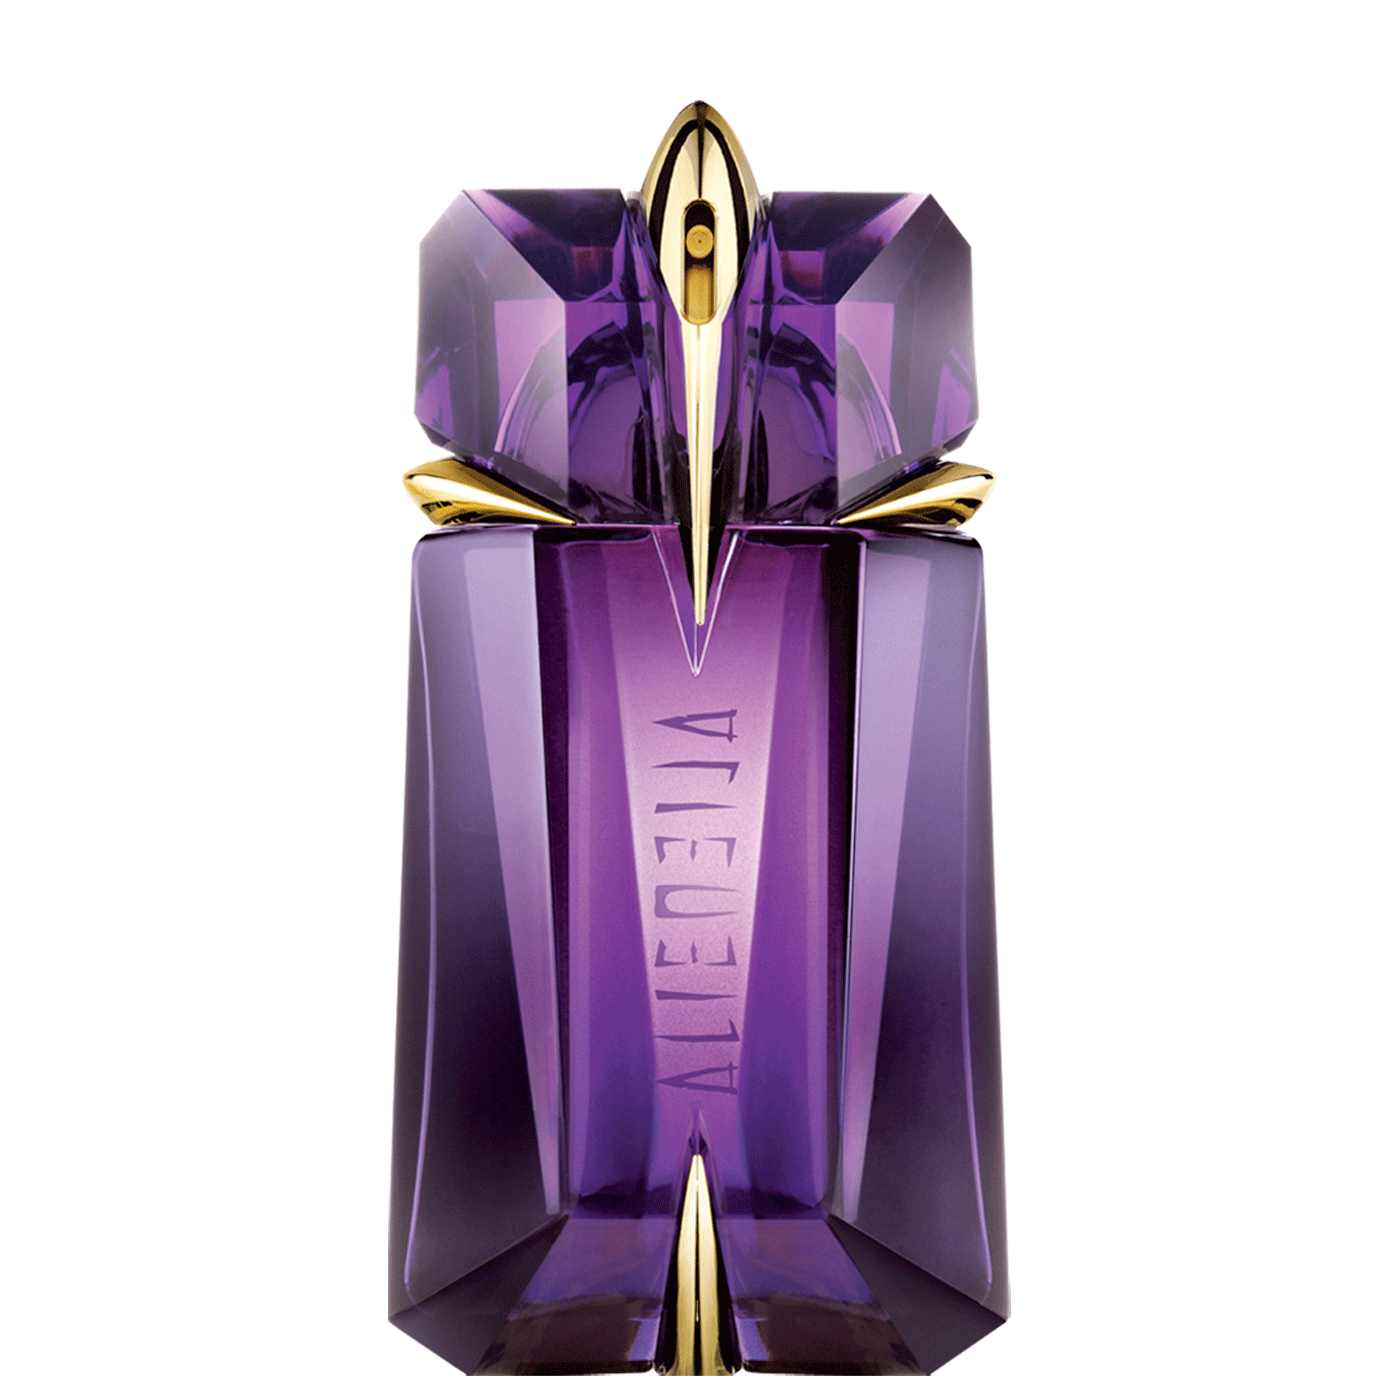 French Perfume: Top Scents for Daily Wear